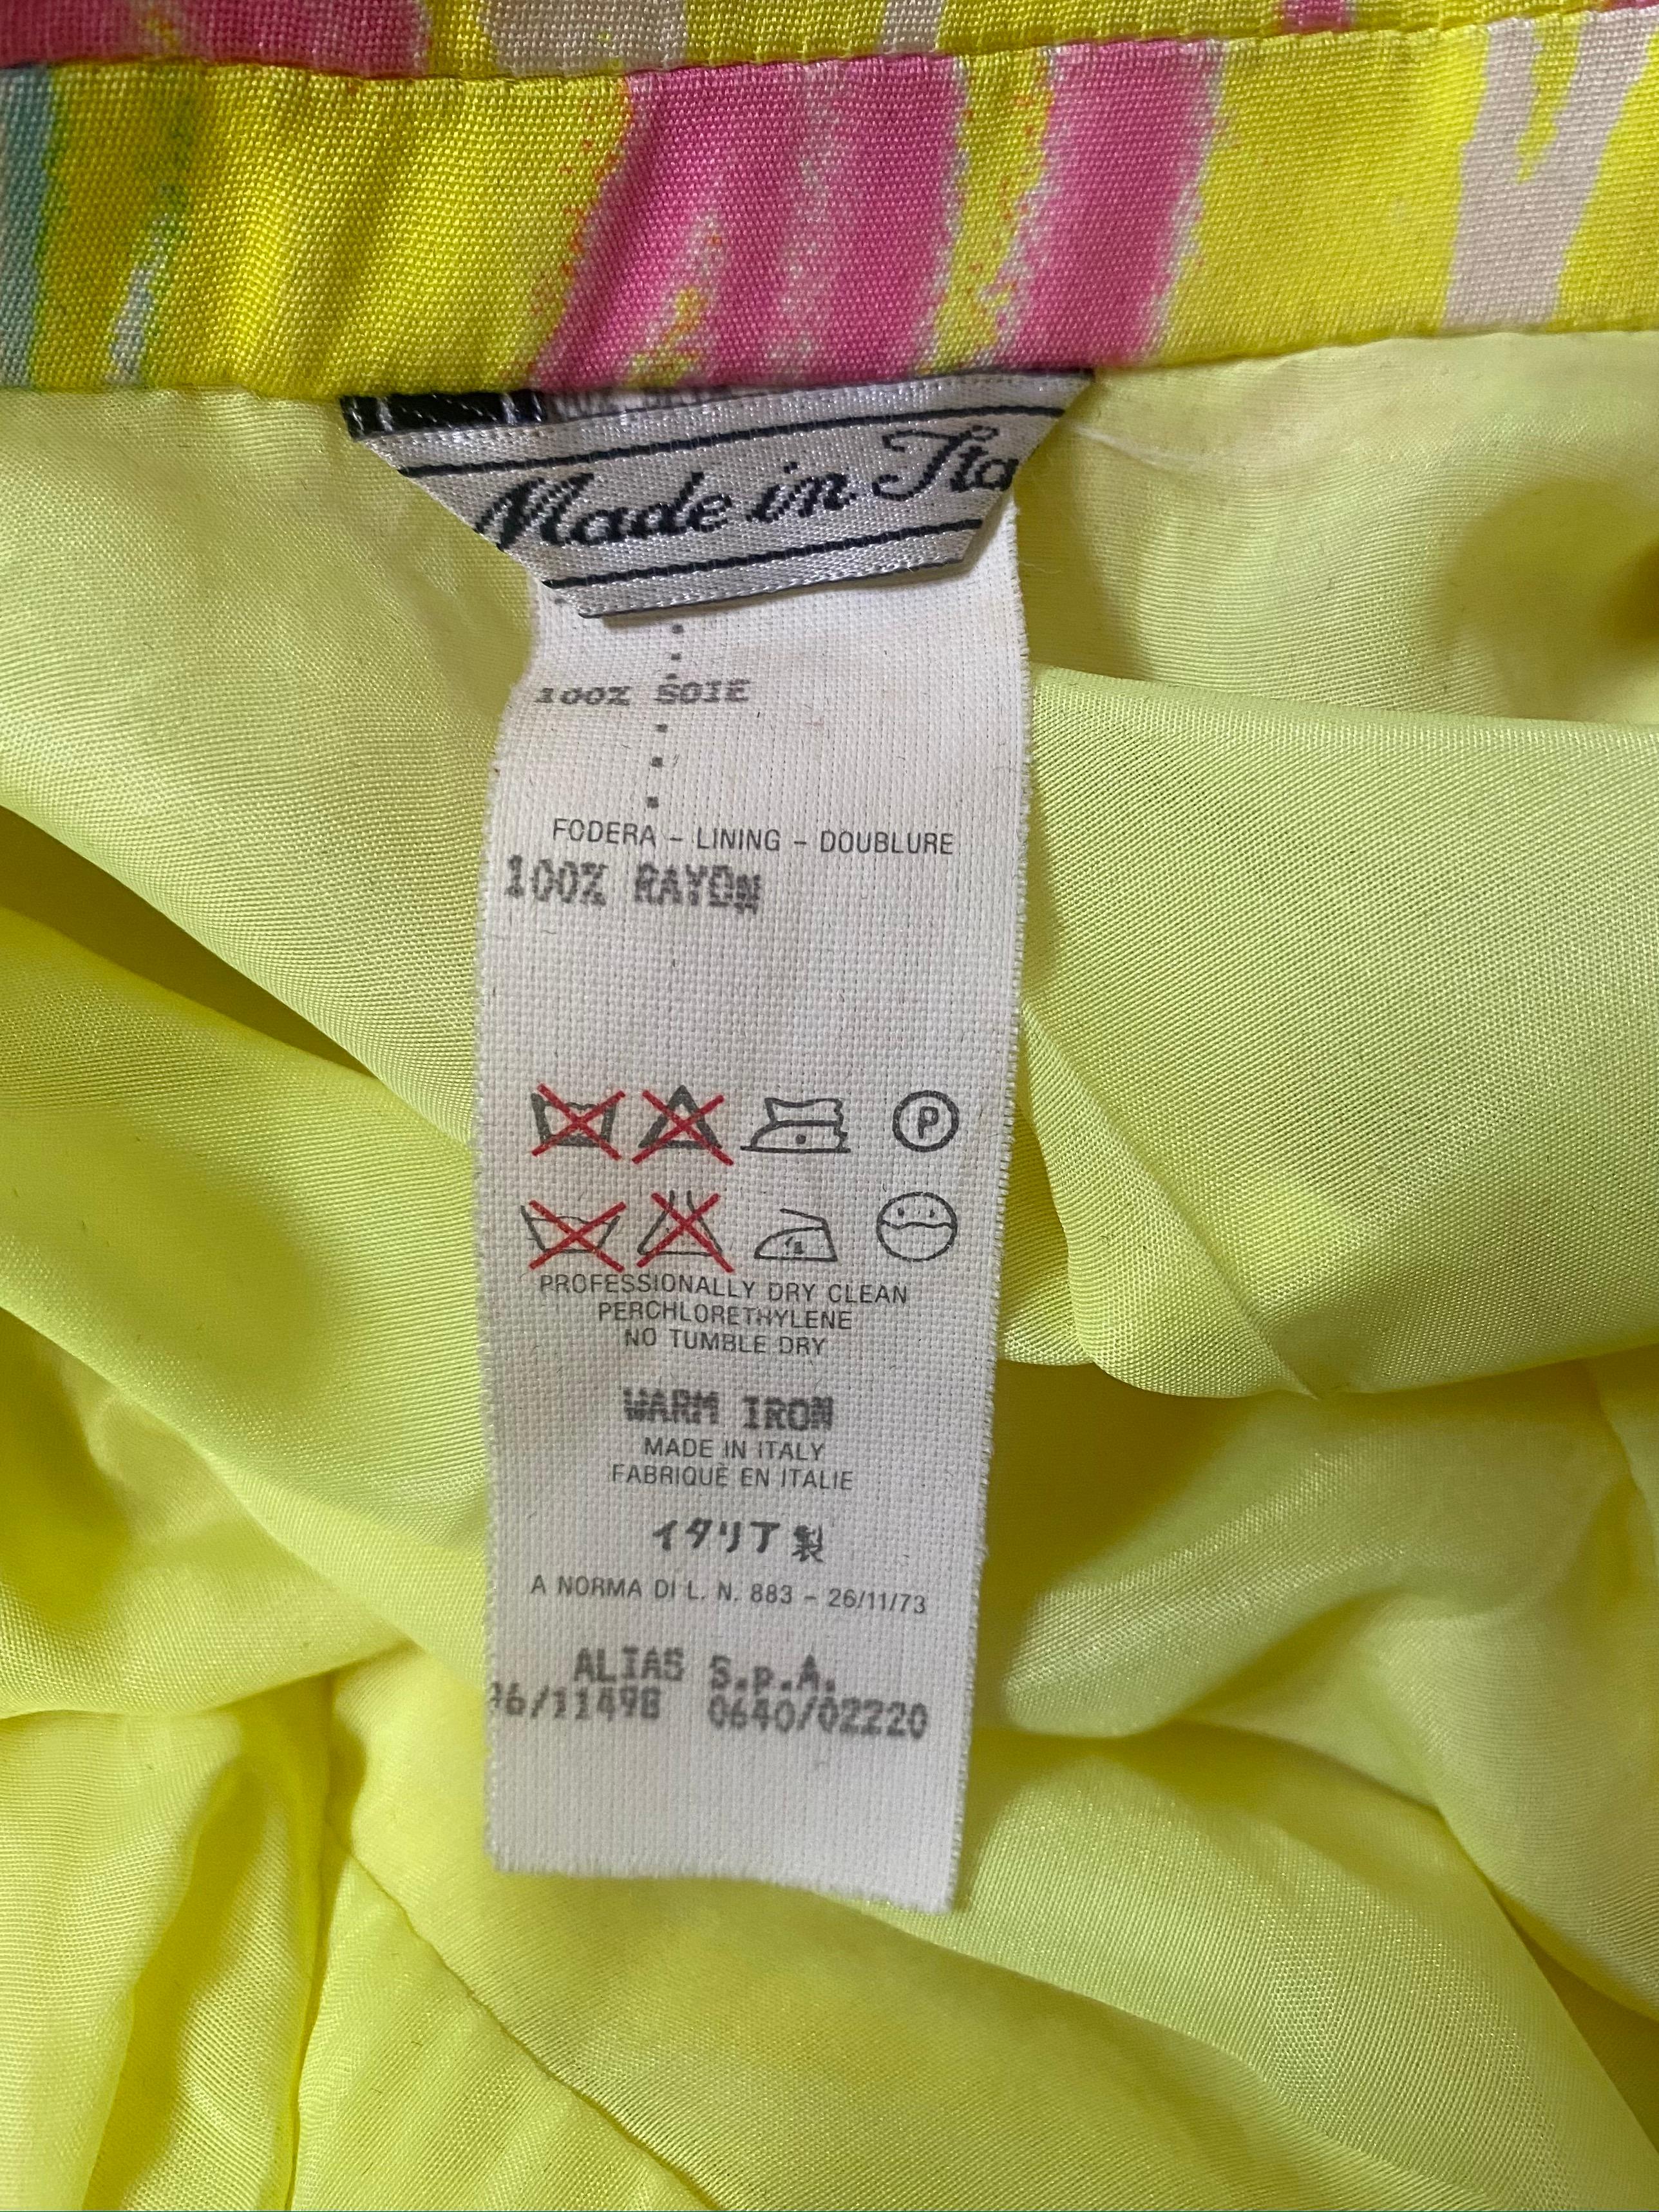 1996 Gianni Versace Yellow Jacket Dress Suit For Sale 4